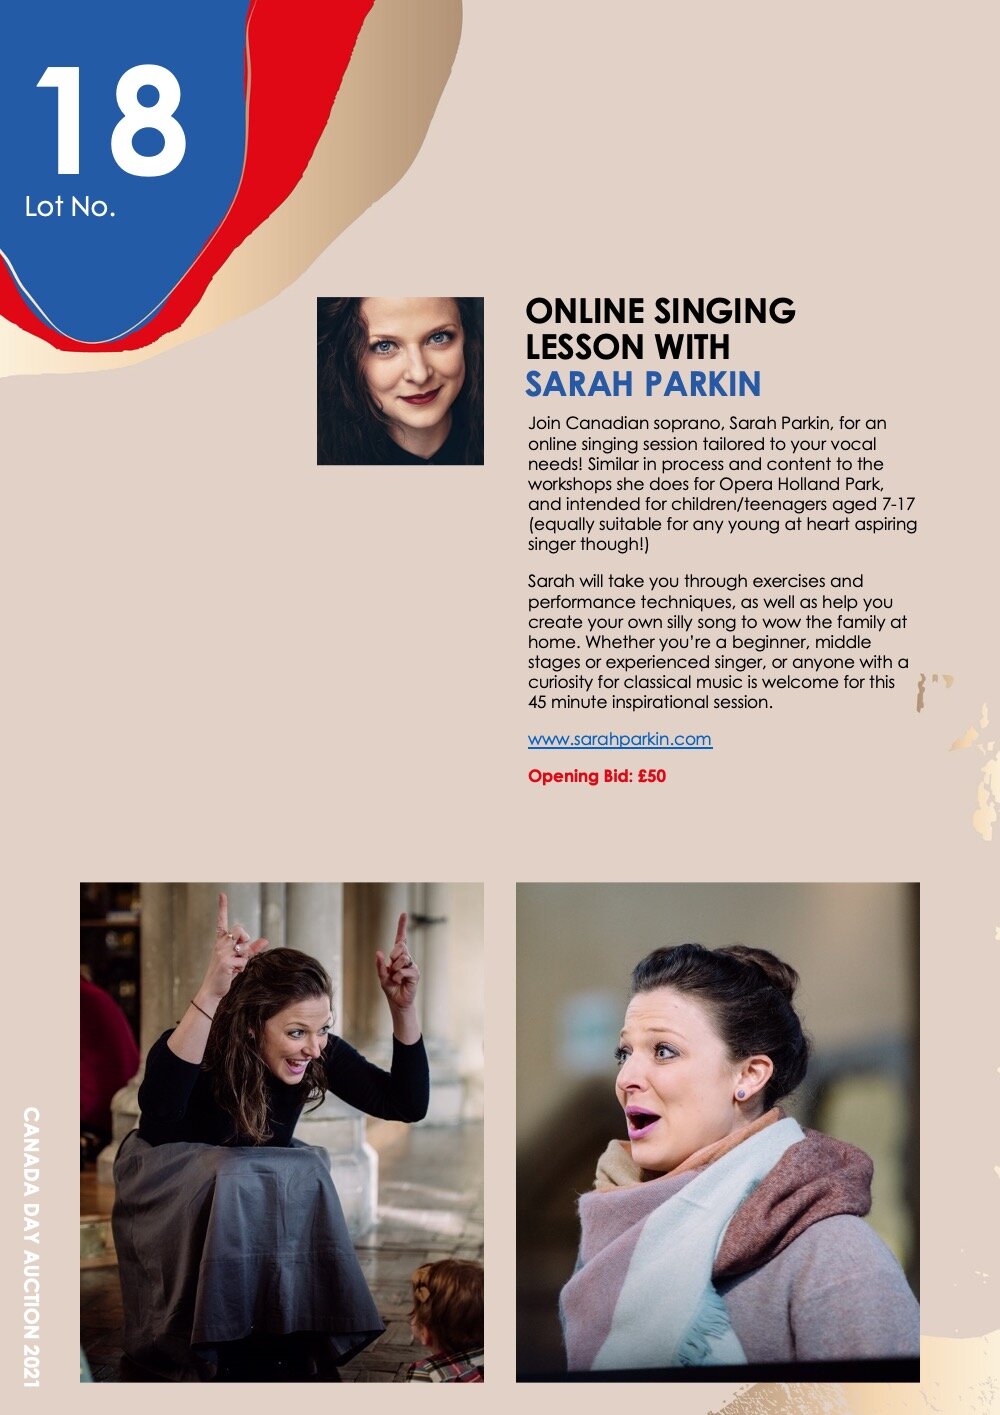   ONLINE SINGING LESSON WITH SARAH PARKIN    Join Canadian soprano, Sarah Parkin, for an online singing session tailored to your vocal needs! Similar in process and content to the workshops she does for Opera Holland Park, and intended for children/t